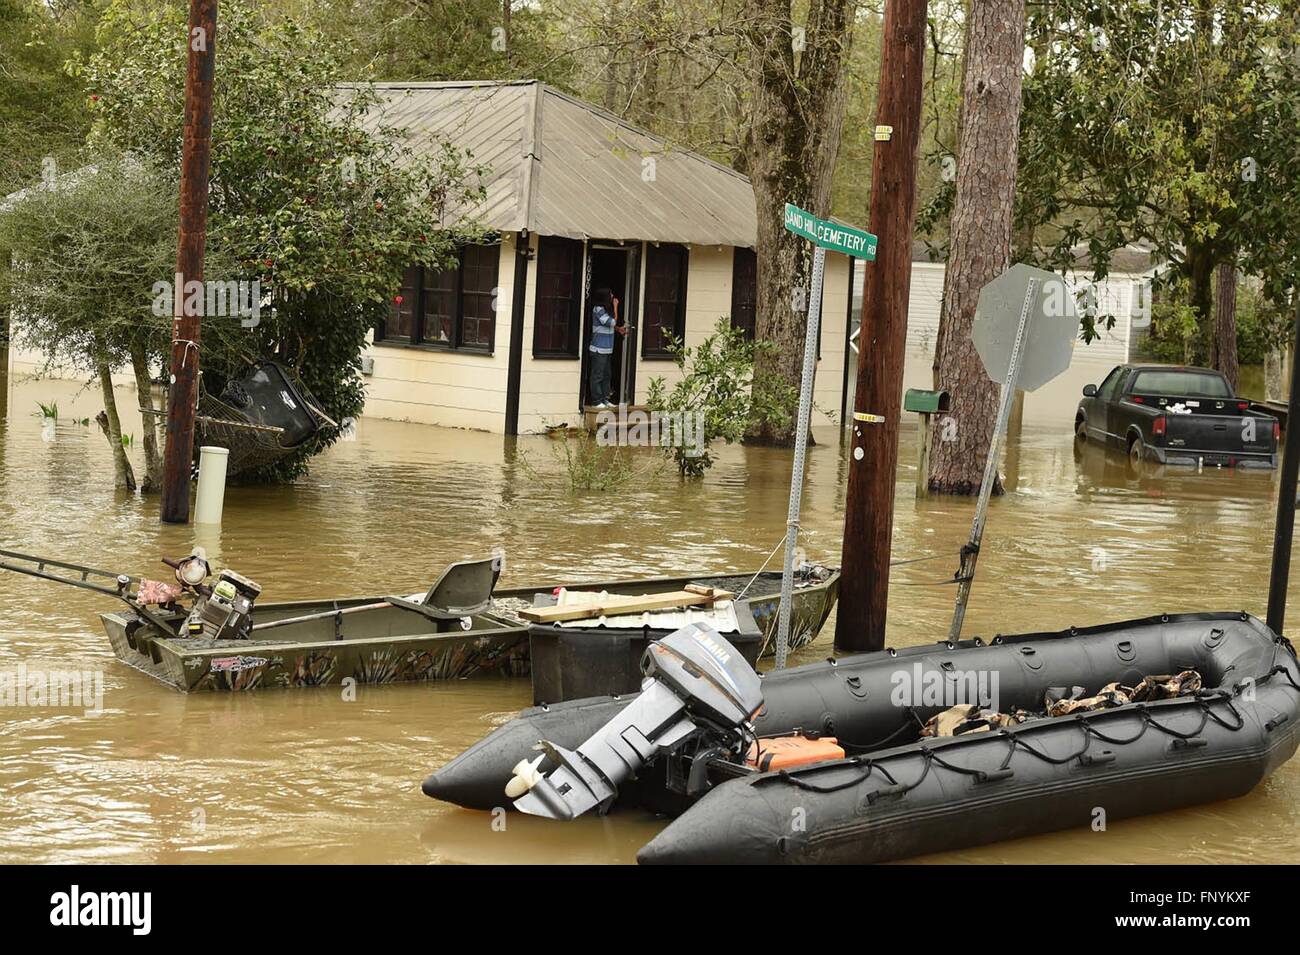 Residents look out from their homes submerged in floodwaters along the Pearl and Leaf Rivers after record breaking storms dumped rain across the deep south March 13, 2016 in Ponchatoula, Louisiana. Stock Photo